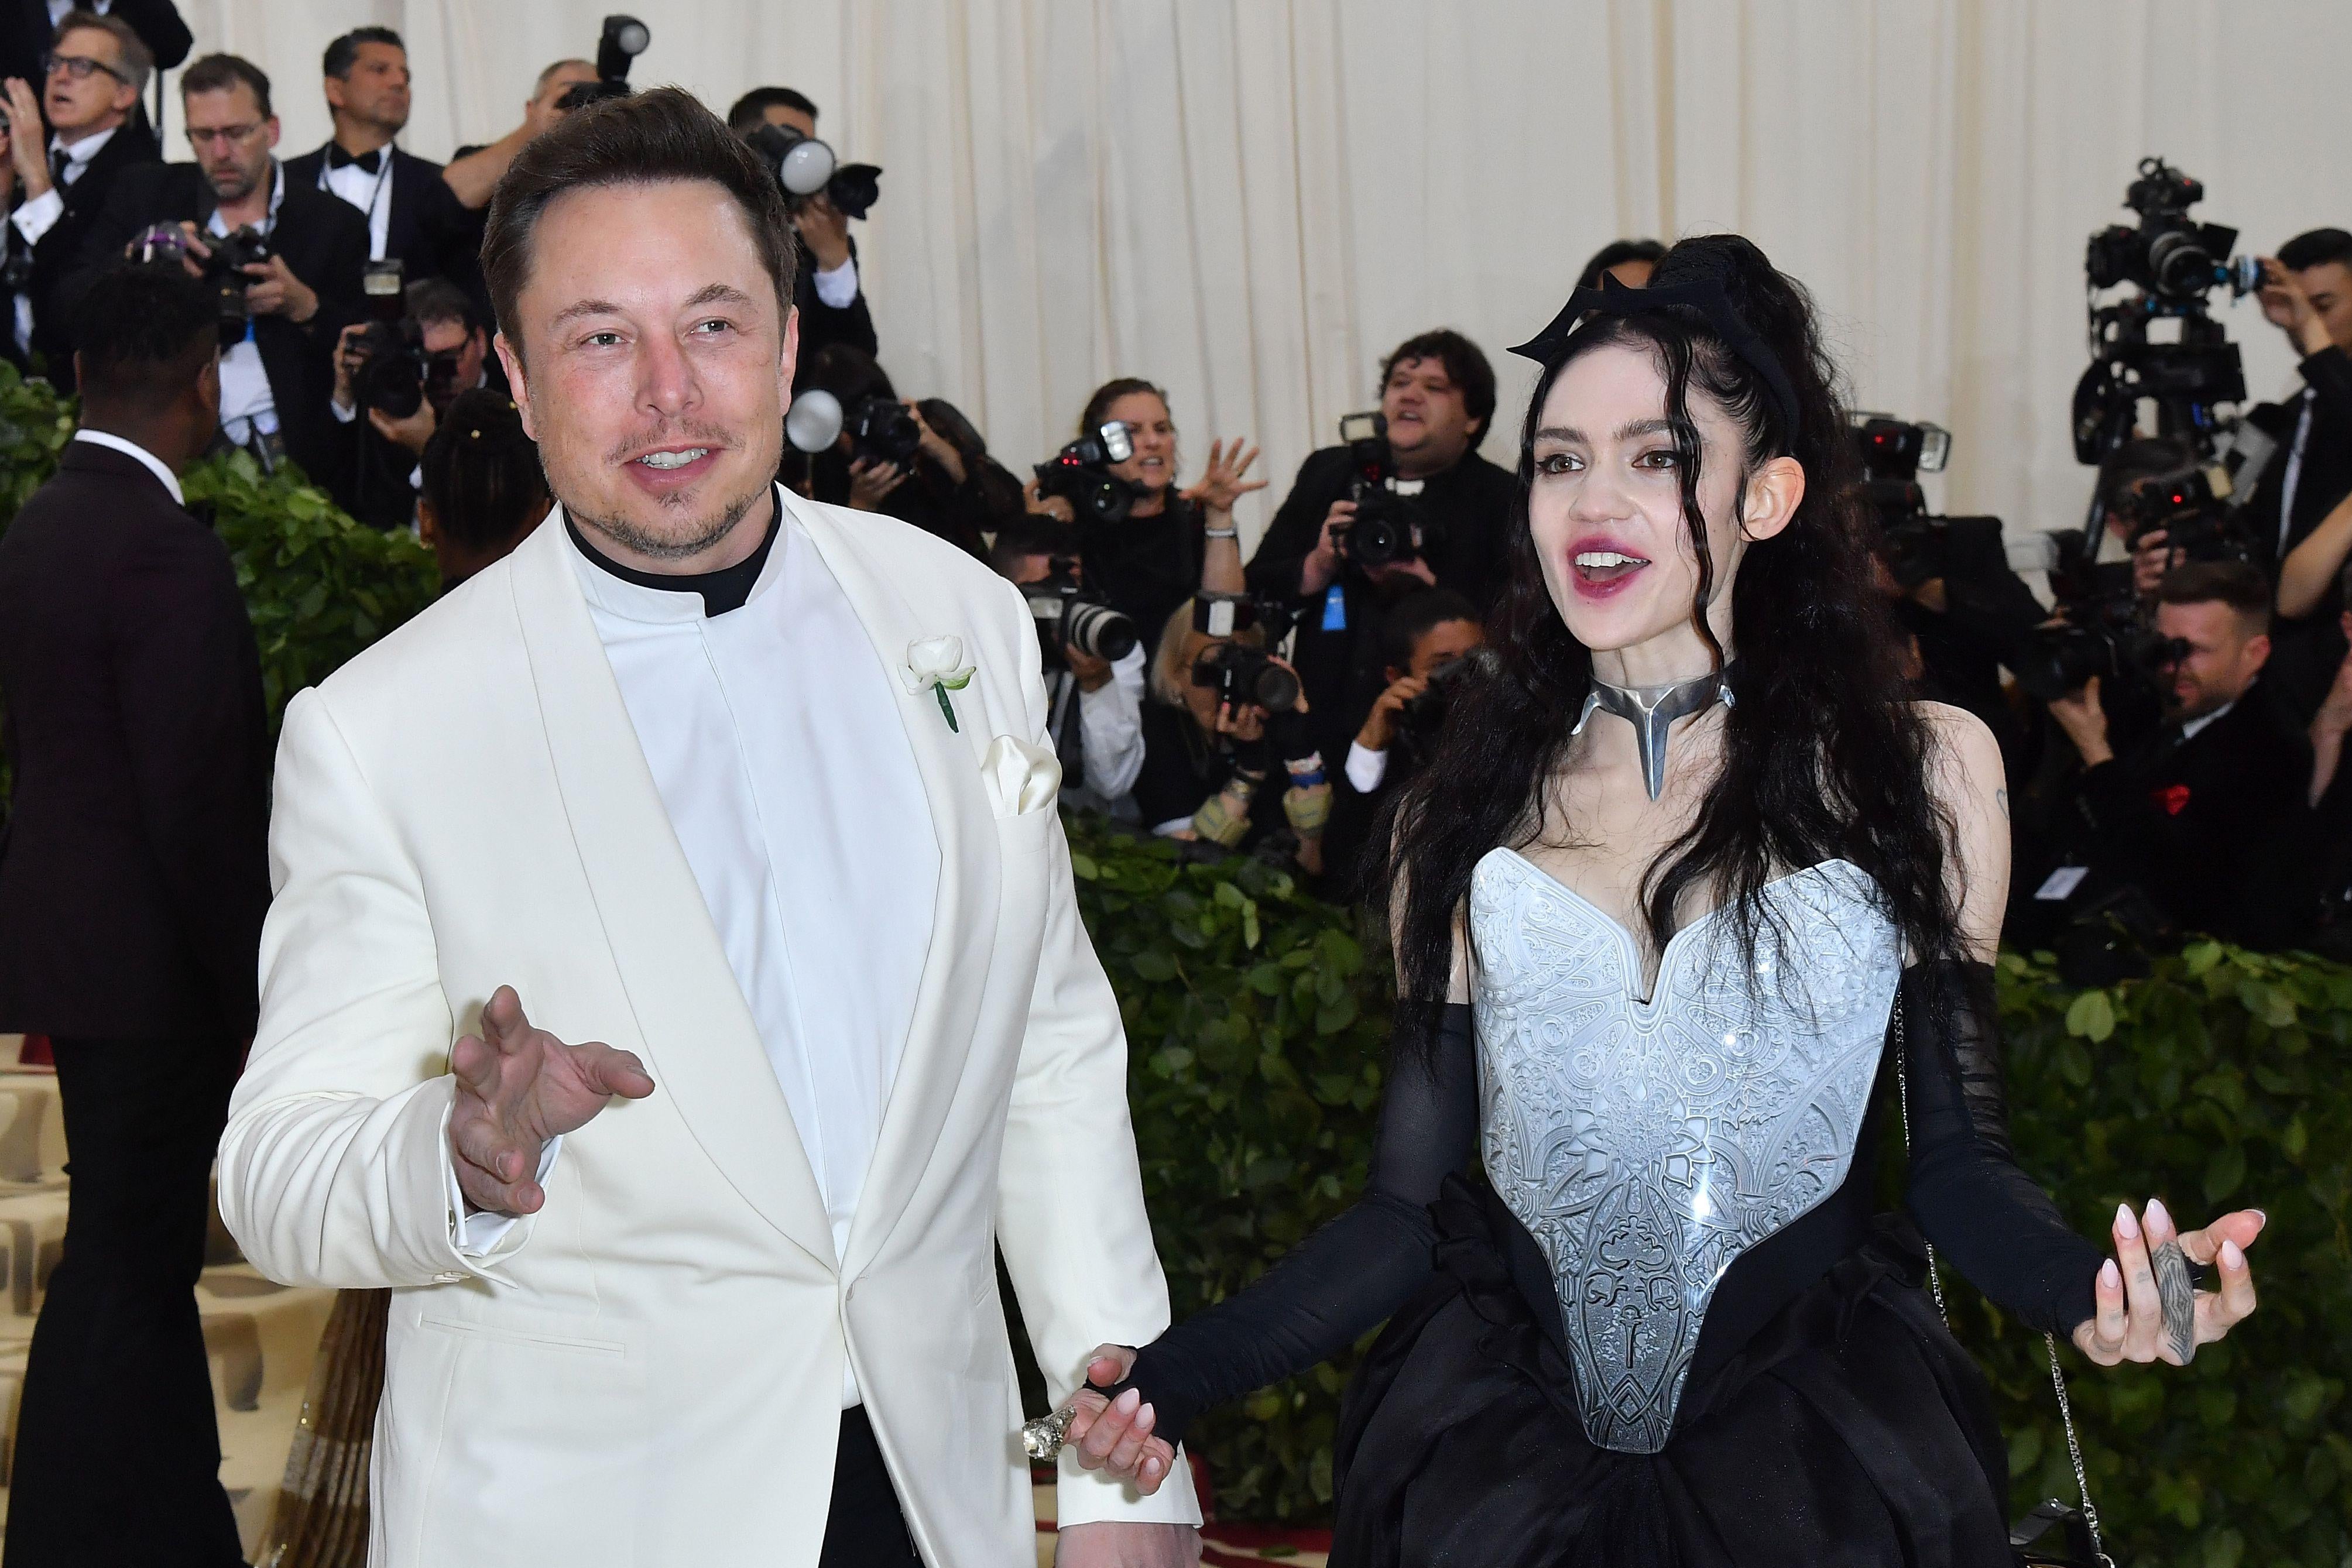 Elon Musk and Grimes arrive for the 2018 Met Gala on May 7, 2018, at the Metropolitan Museum of Art in New York. - The Gala raises money for the Metropolitan Museum of Arts Costume Institute. The Gala's 2018 theme is Heavenly Bodies: Fashion and the Catholic Imagination. (Photo by ANGELA WEISS / AFP)        (Photo credit should read ANGELA WEISS/AFP/Getty Images)